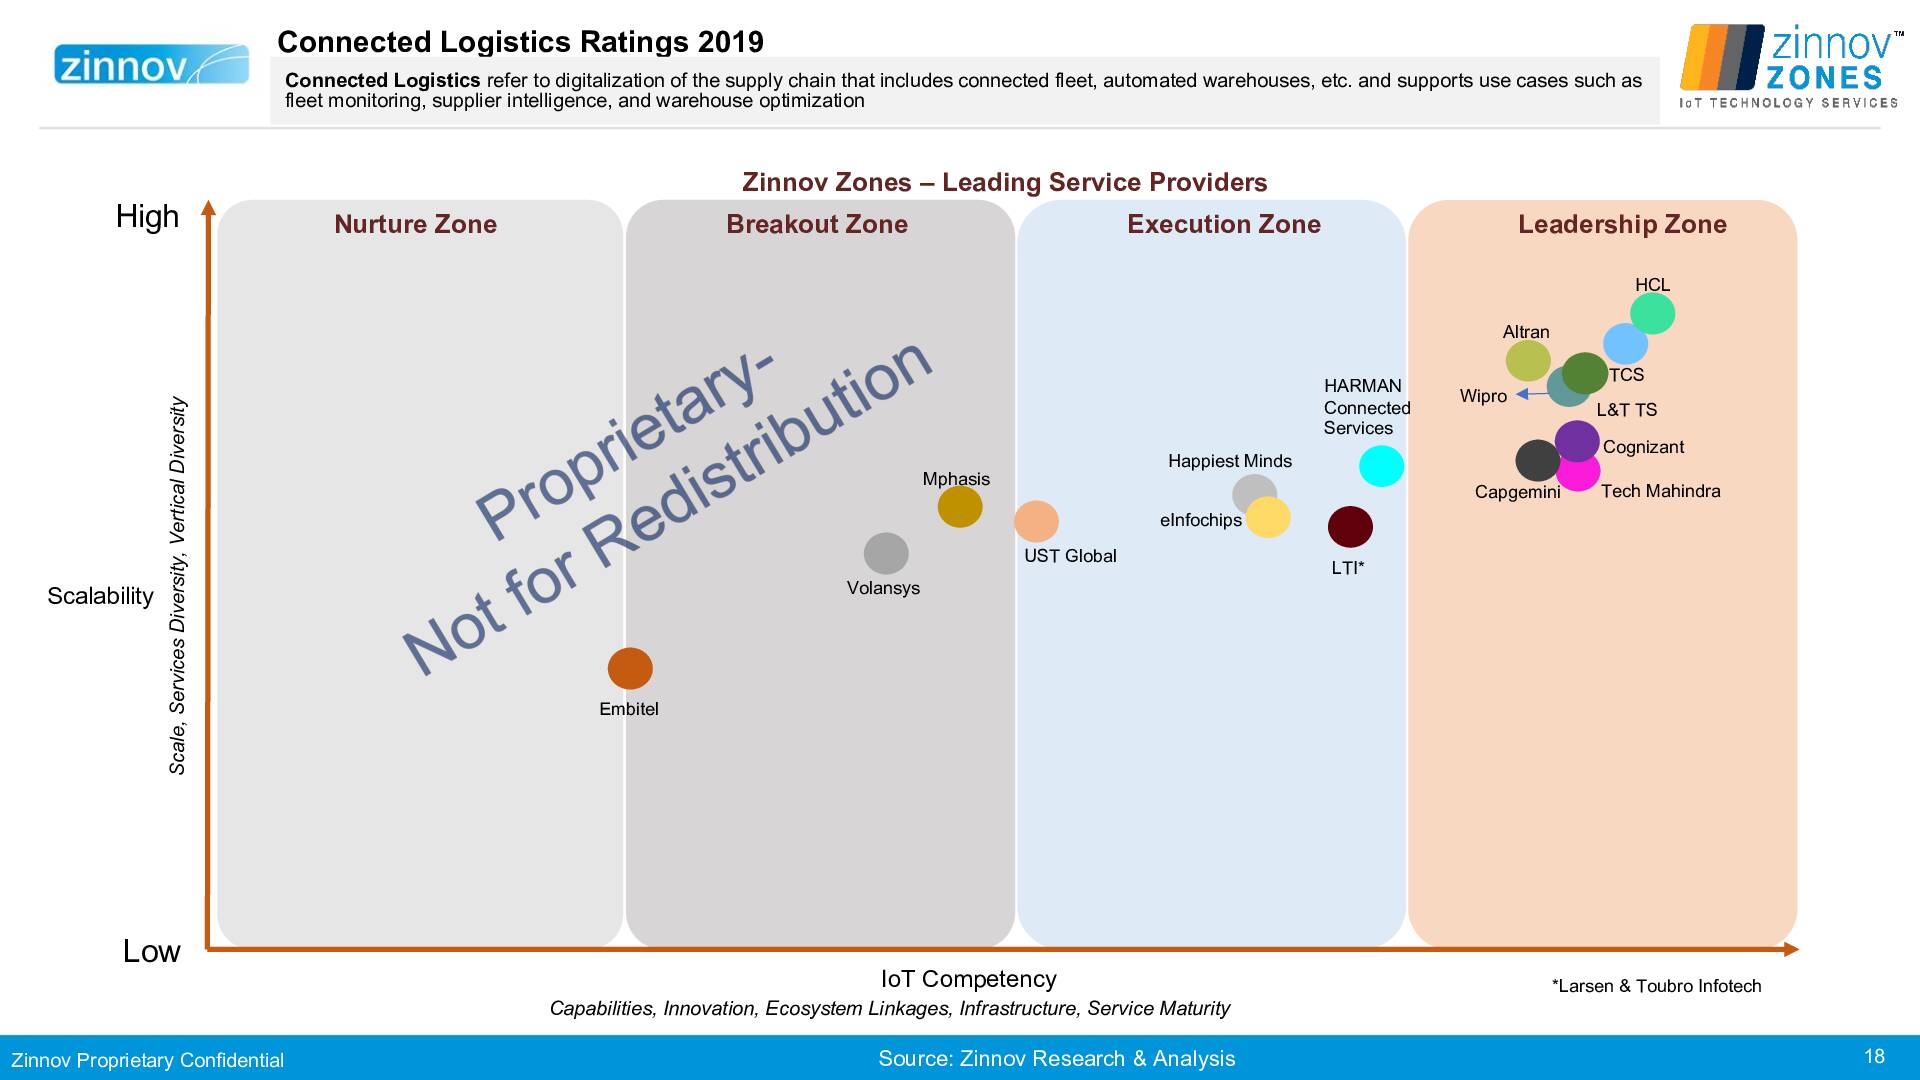 Zinnov Zones Iot Technology Services 2019 Ratings18